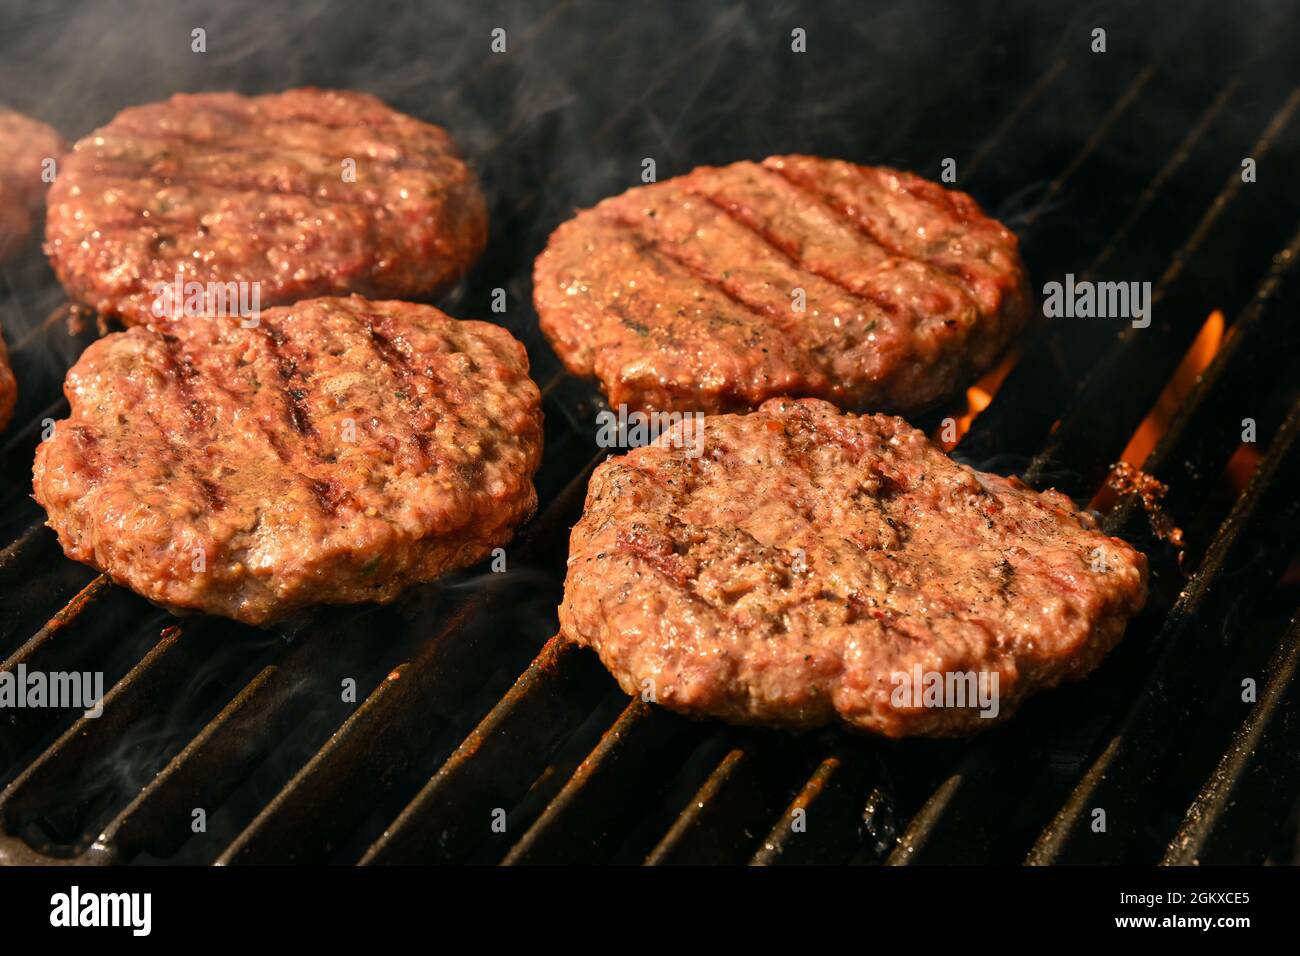 Close up searing and smoking beef or pork meat barbecue burgers for ...